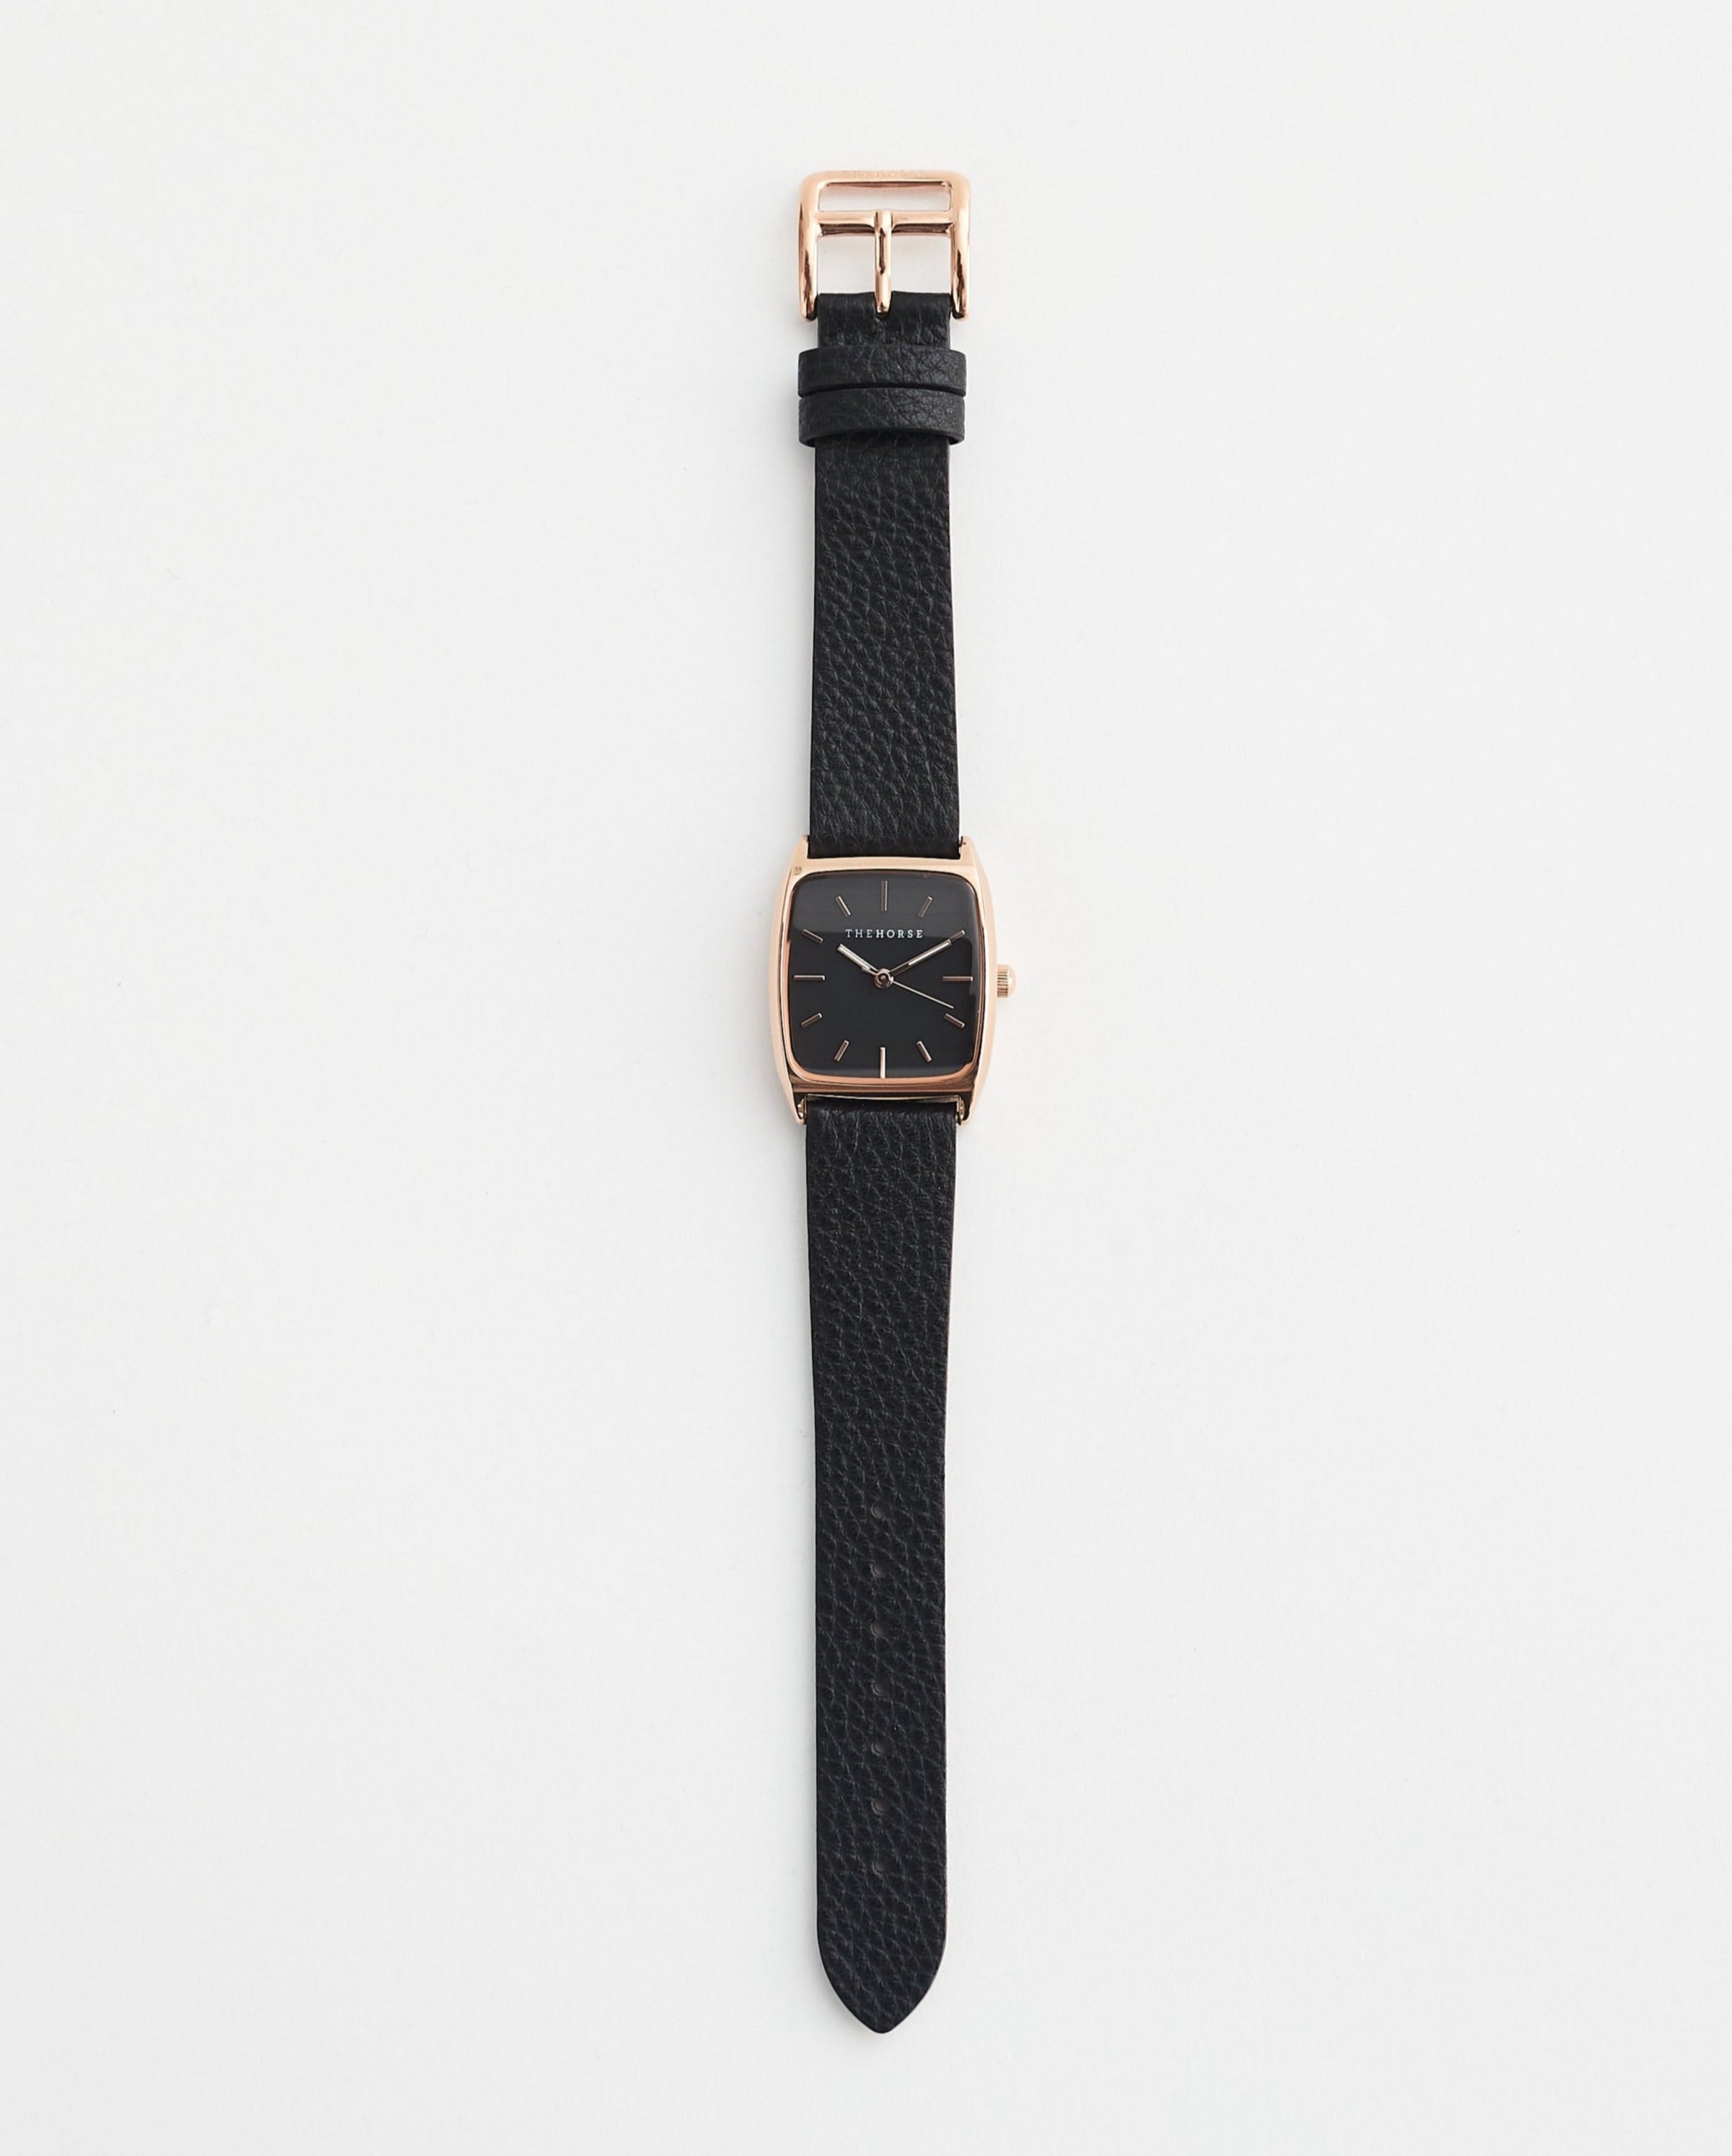 The Dress Watch: Rose Gold Case / Black Dial / Black Leather Strap by The Horse®